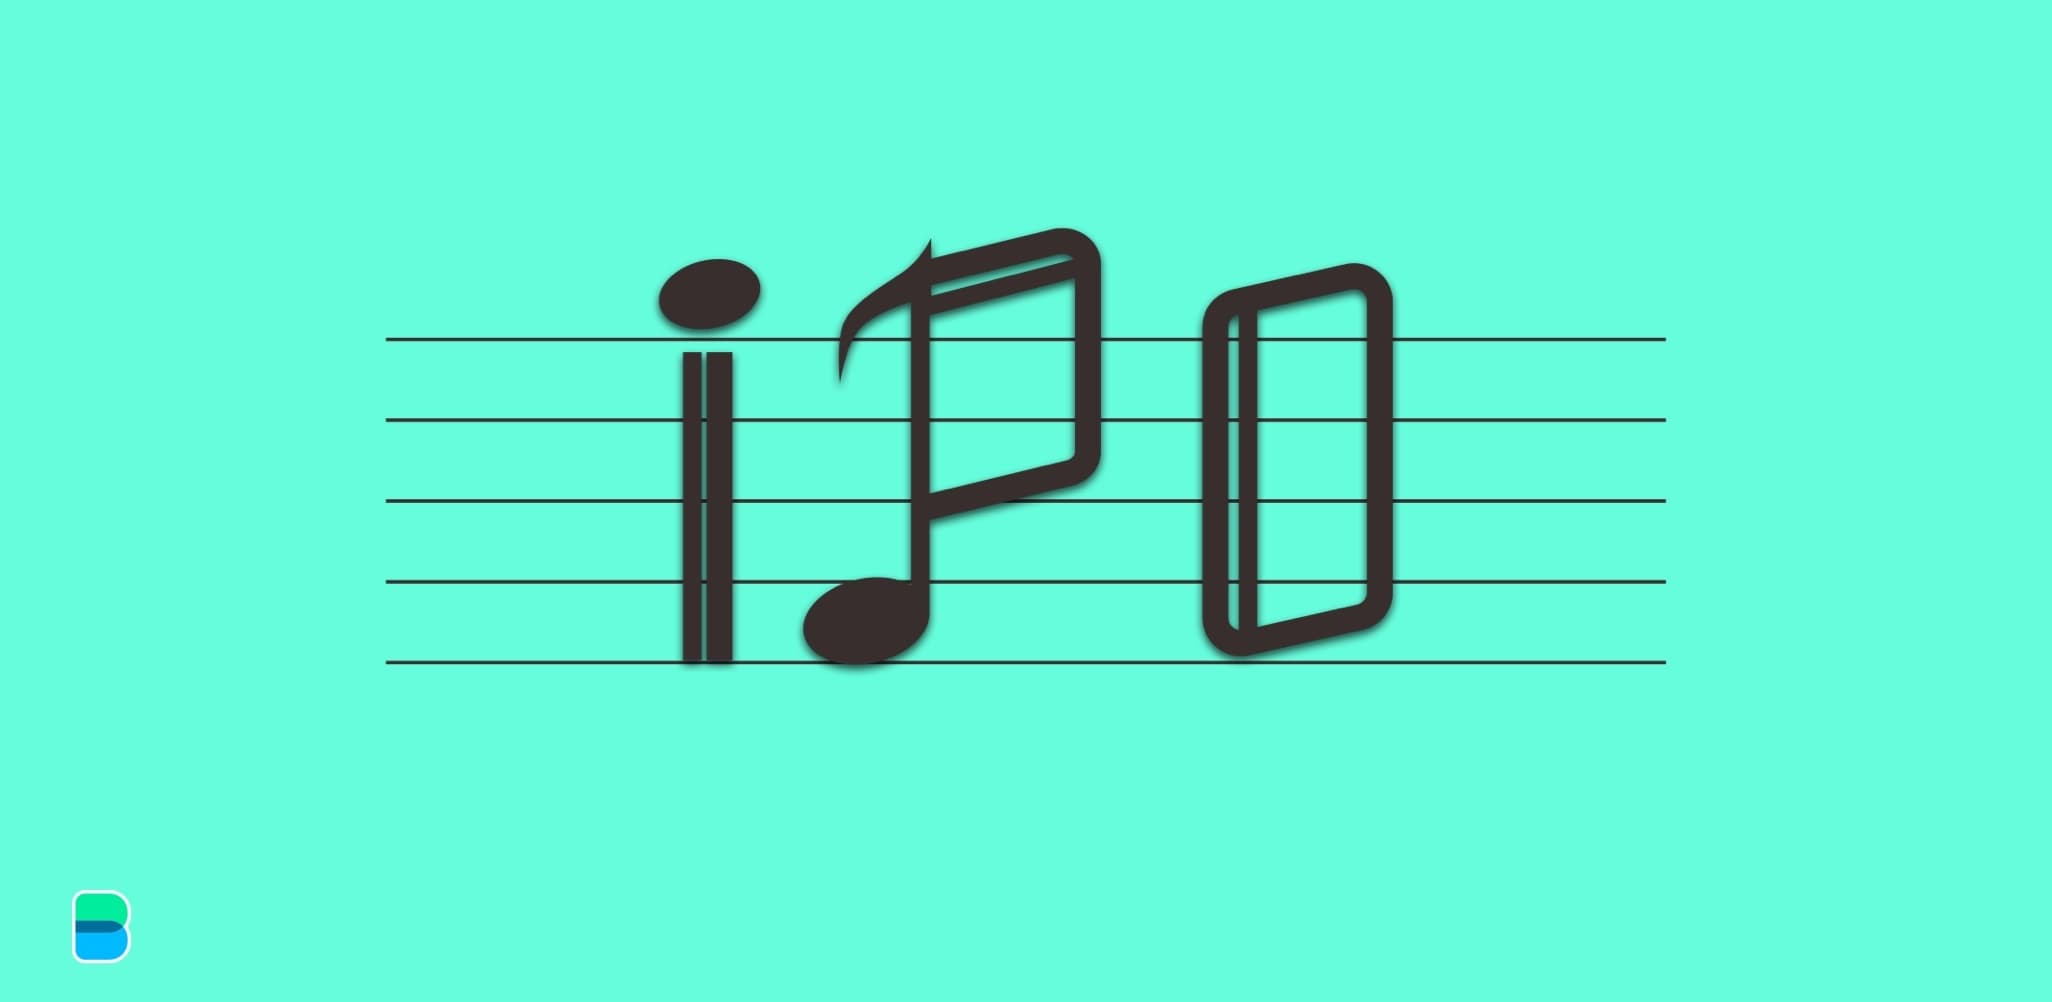 Music sounds better with IPO, baby&nbsp;&nbsp;